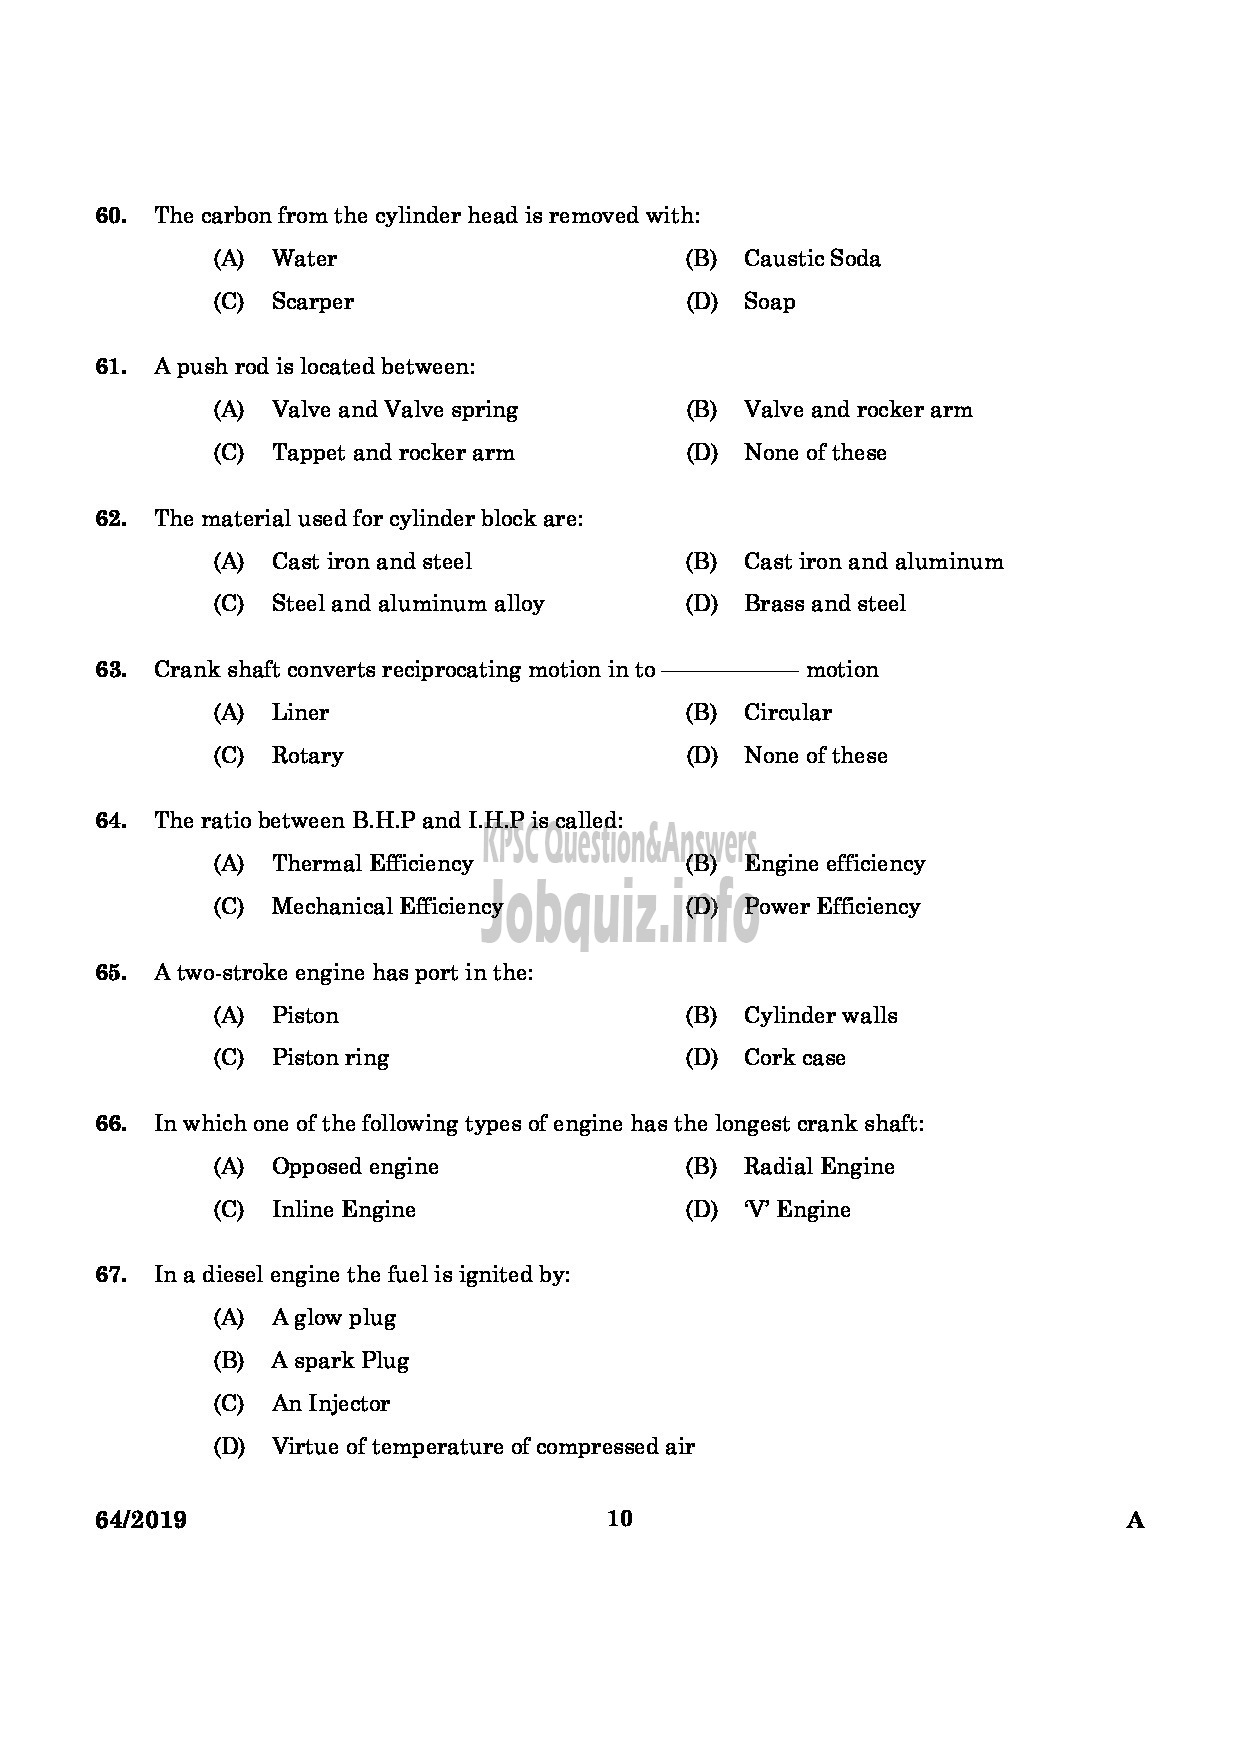 Kerala PSC Question Paper - DRILLING ASSISTANT GROUND WATER DEPARTMENT English -8